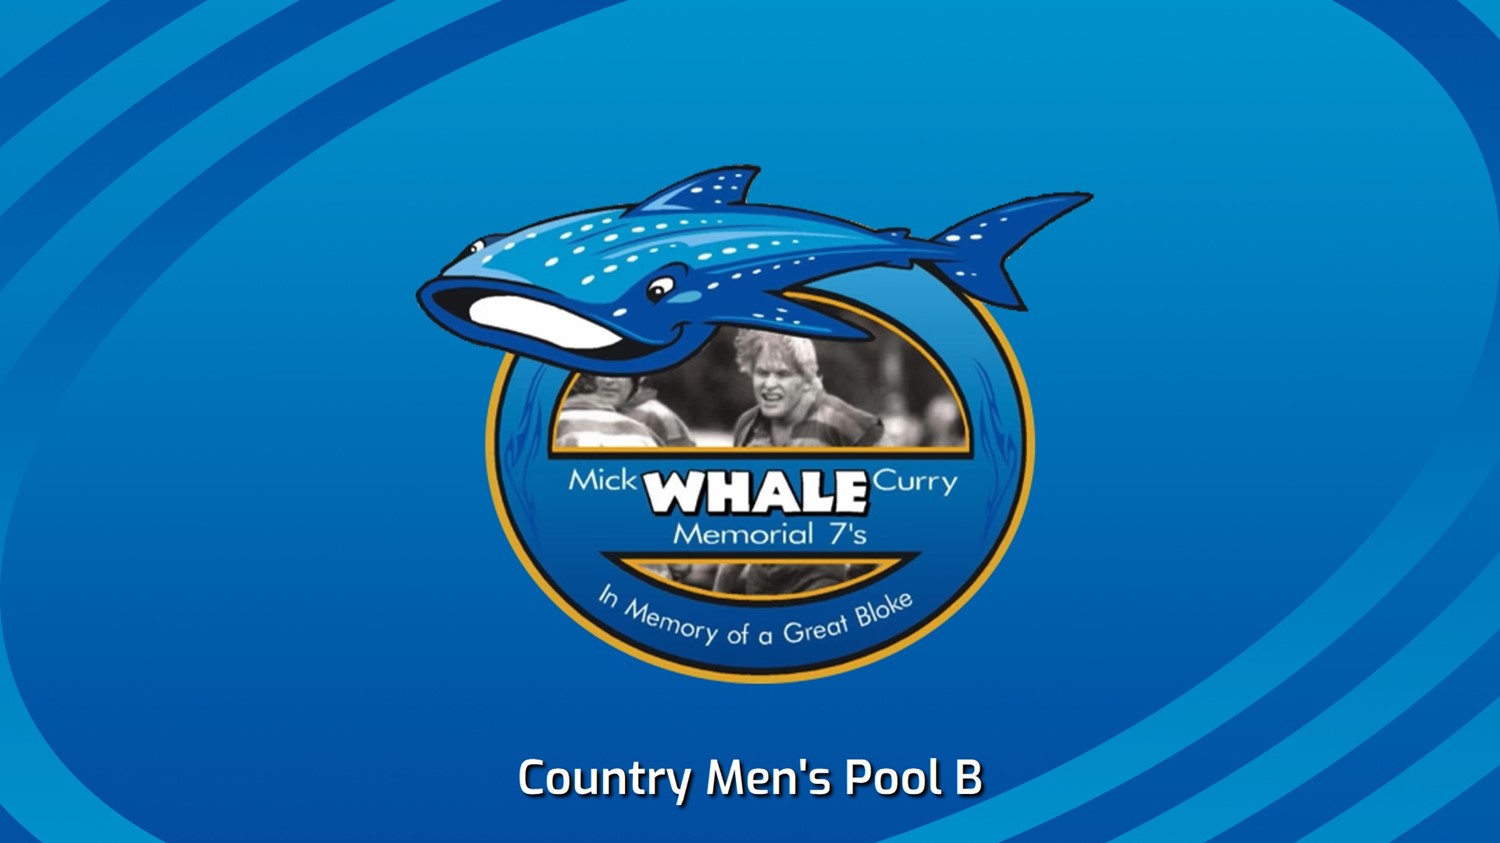 240210-Mick "Whale" Curry Memorial Rugby Sevens Country Men's Pool B - The Lakes Rugby Club v Newport Rugby Minigame Slate Image